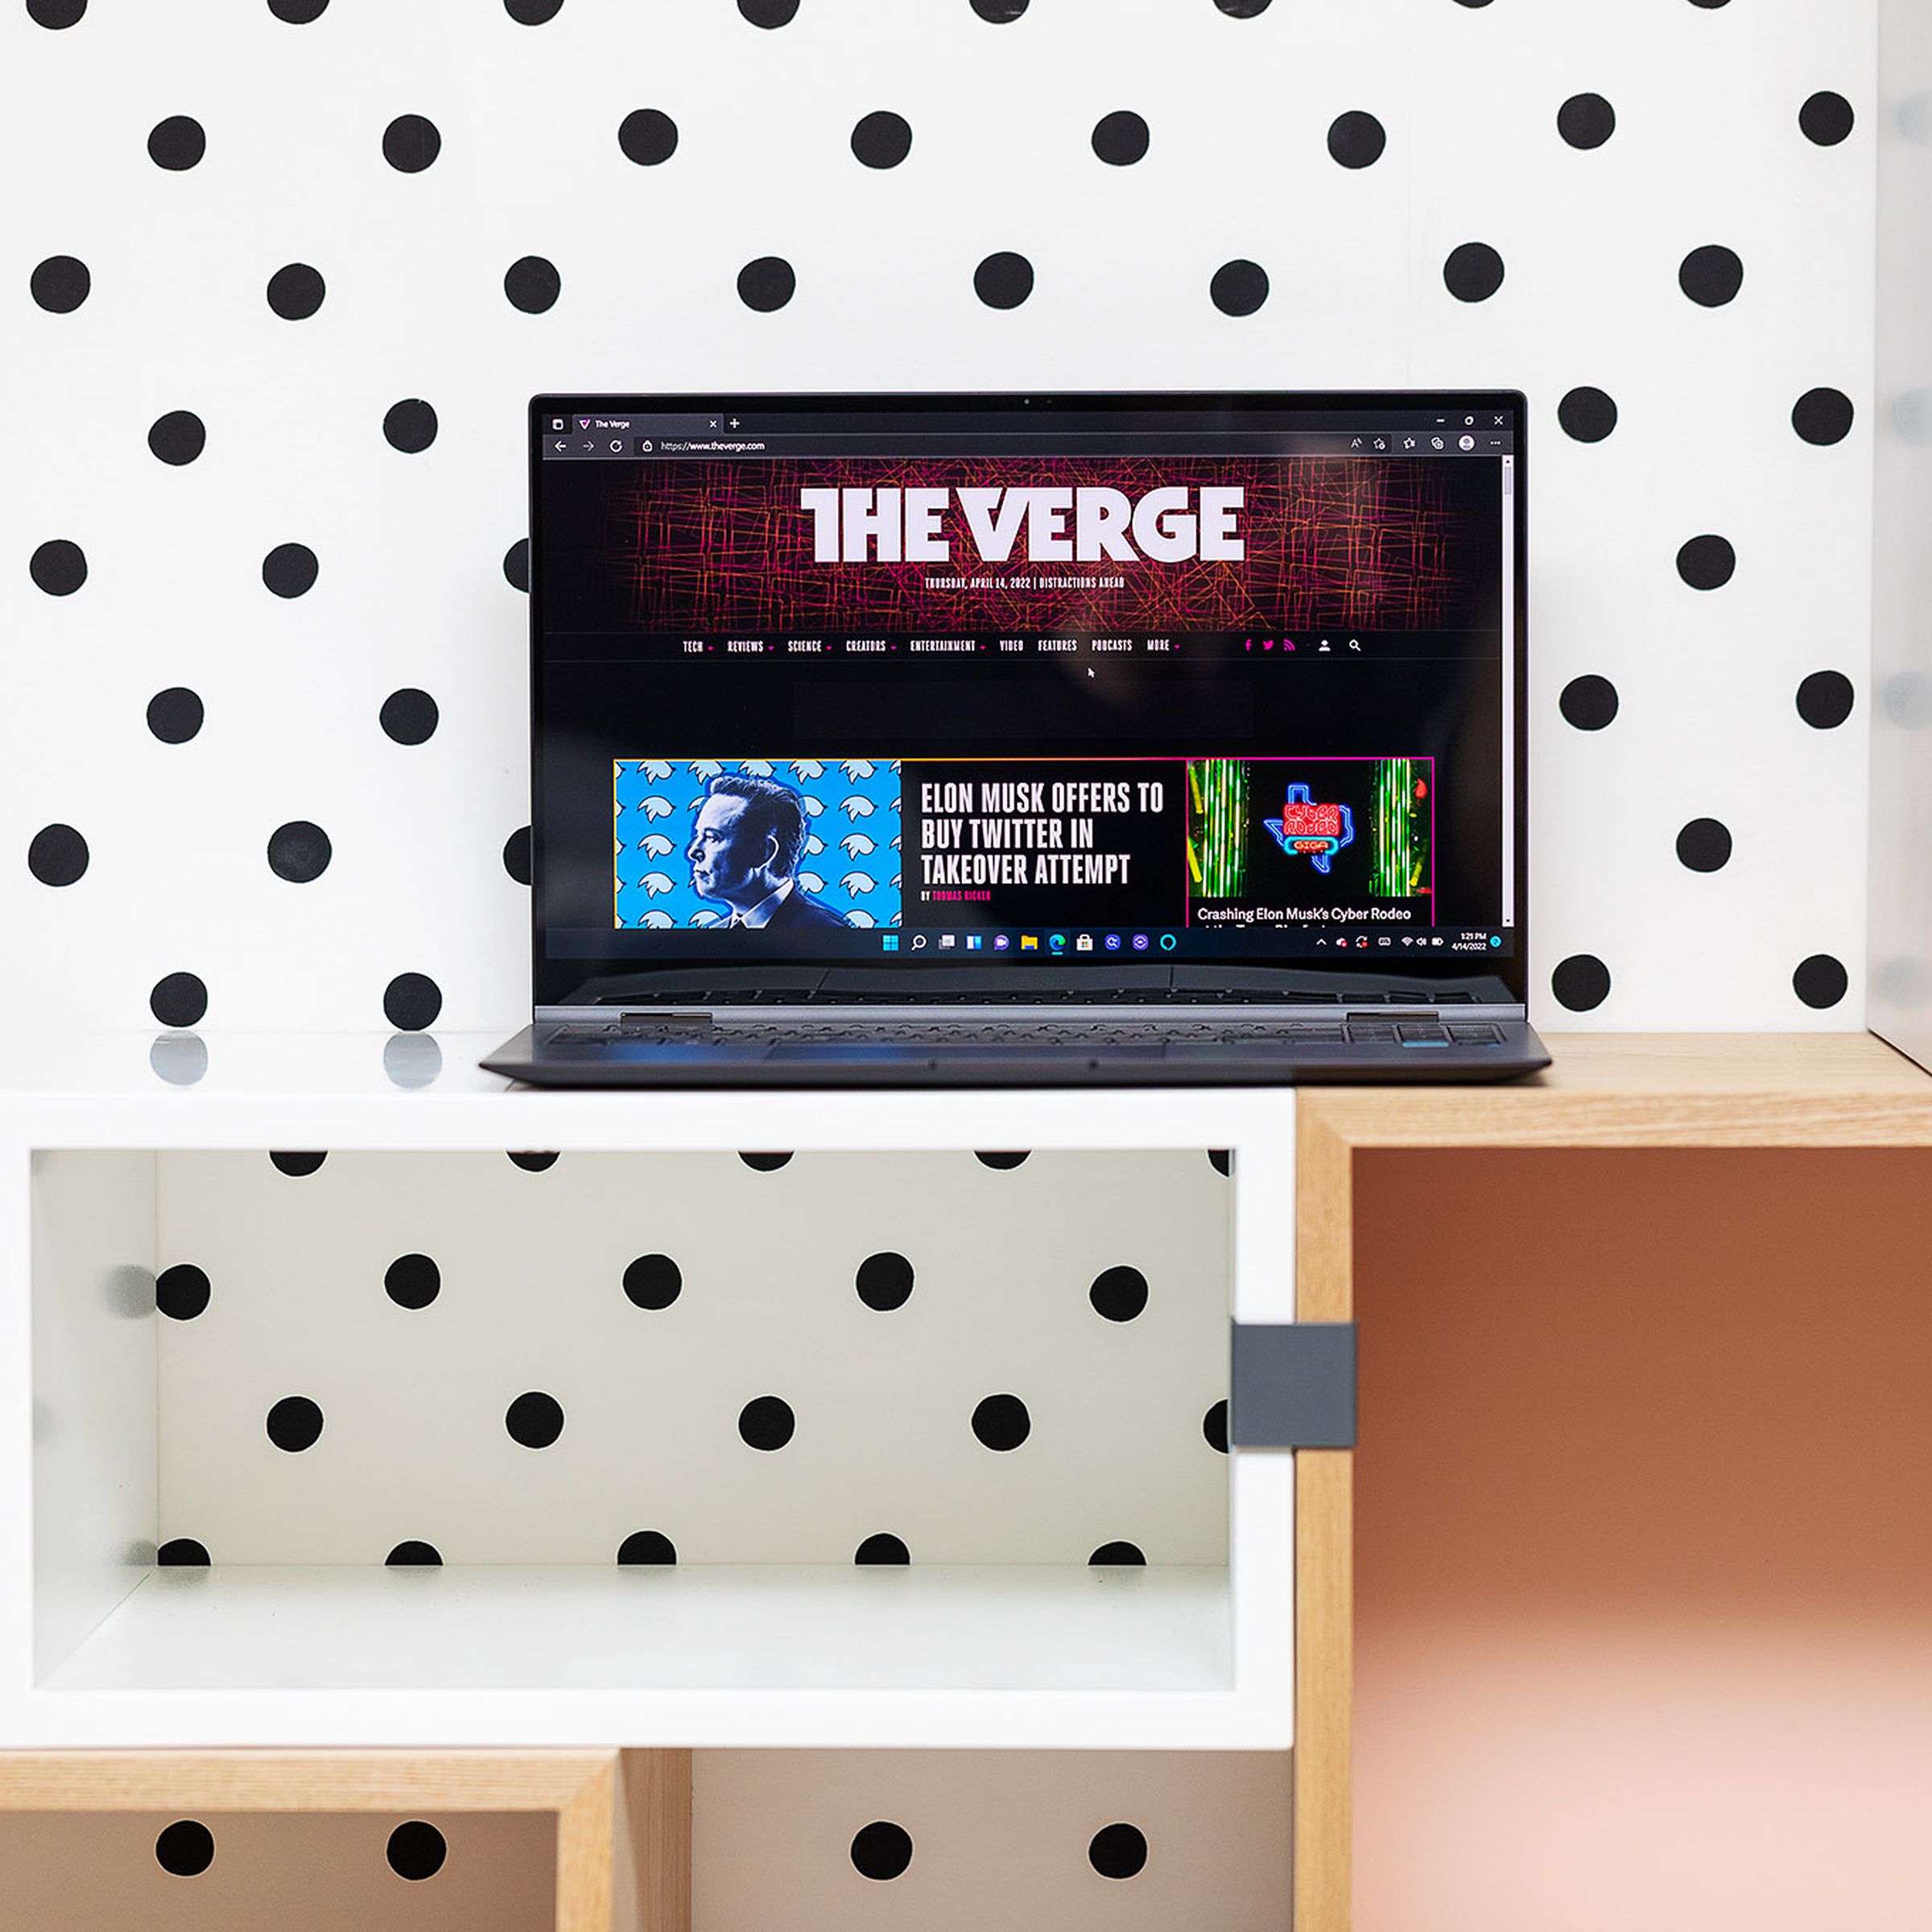 The Samsung Galaxy Book2 Pro 360 in front of polka dot wallpaper. The screen displays The Verge homepage.